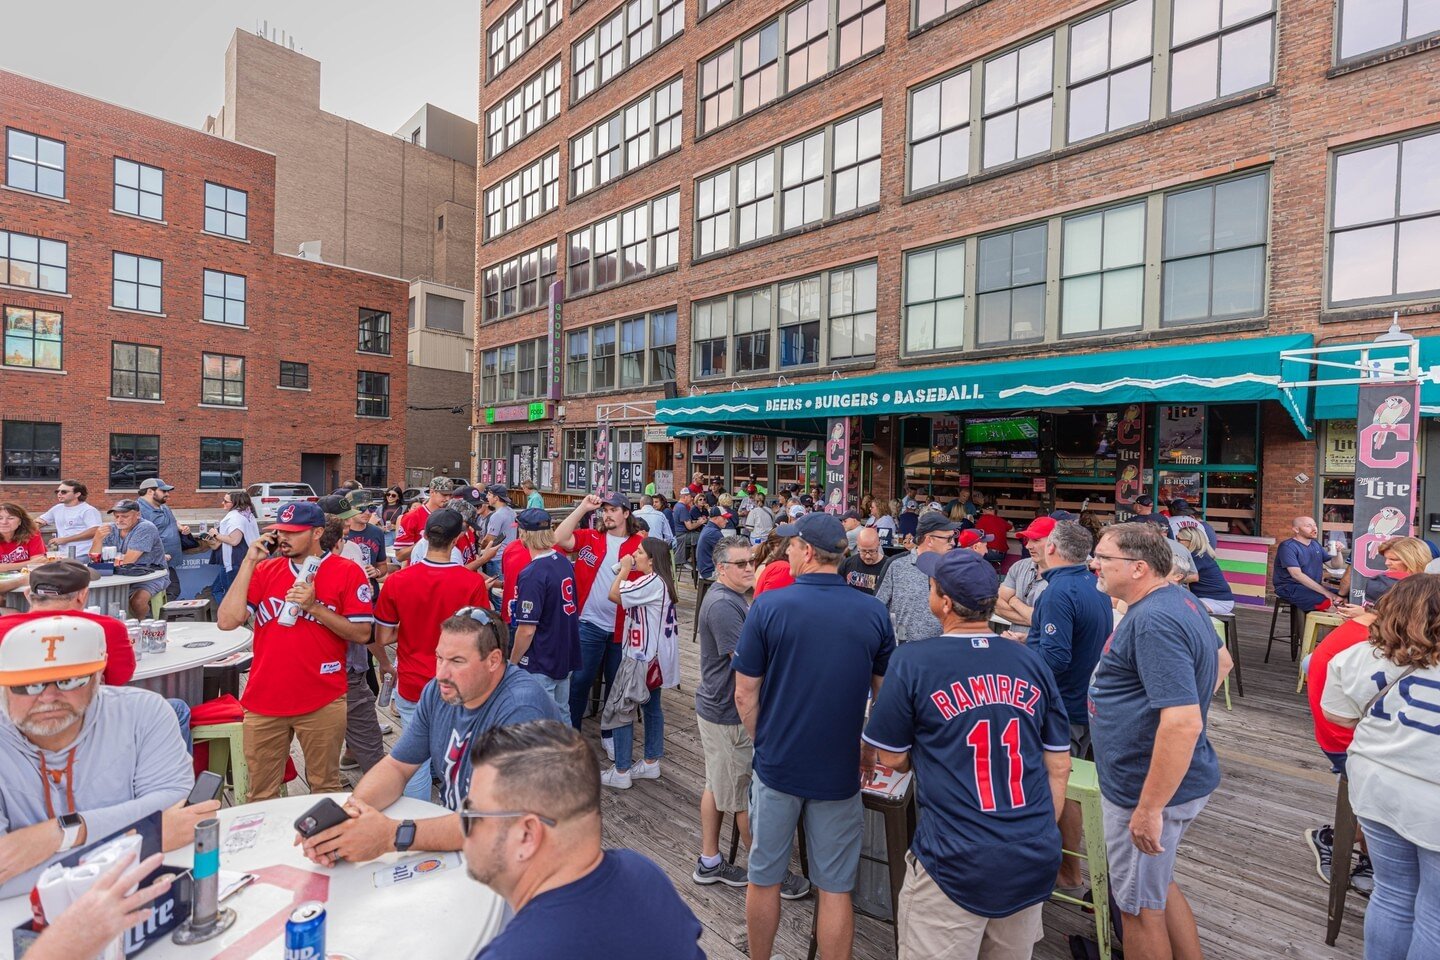 The party is always at the Parrot before the fun starts at Progressive Field! 🙌